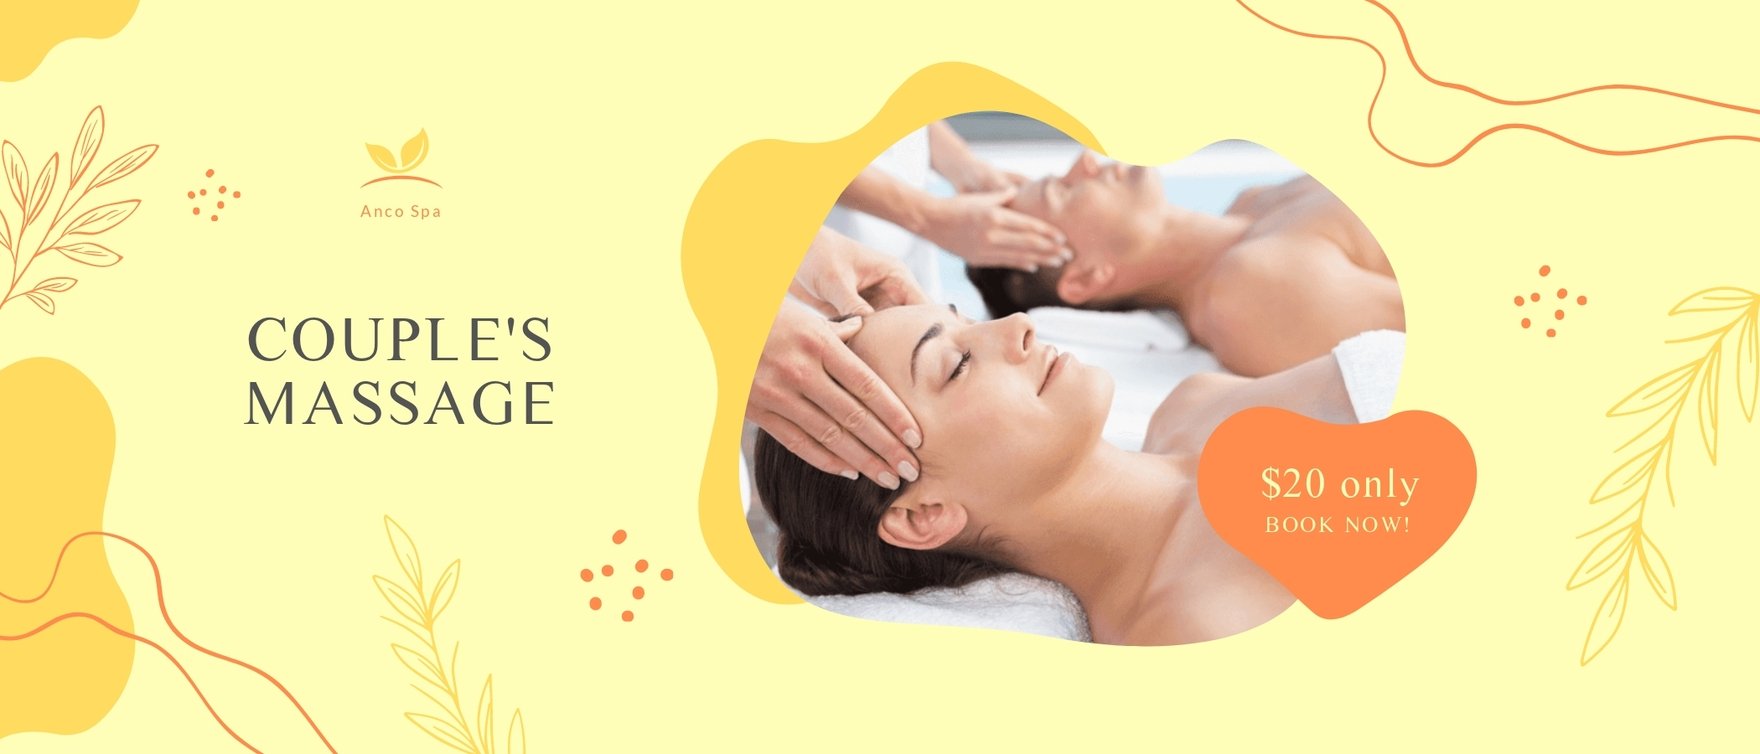 Couples Massage Promotion Banner Template